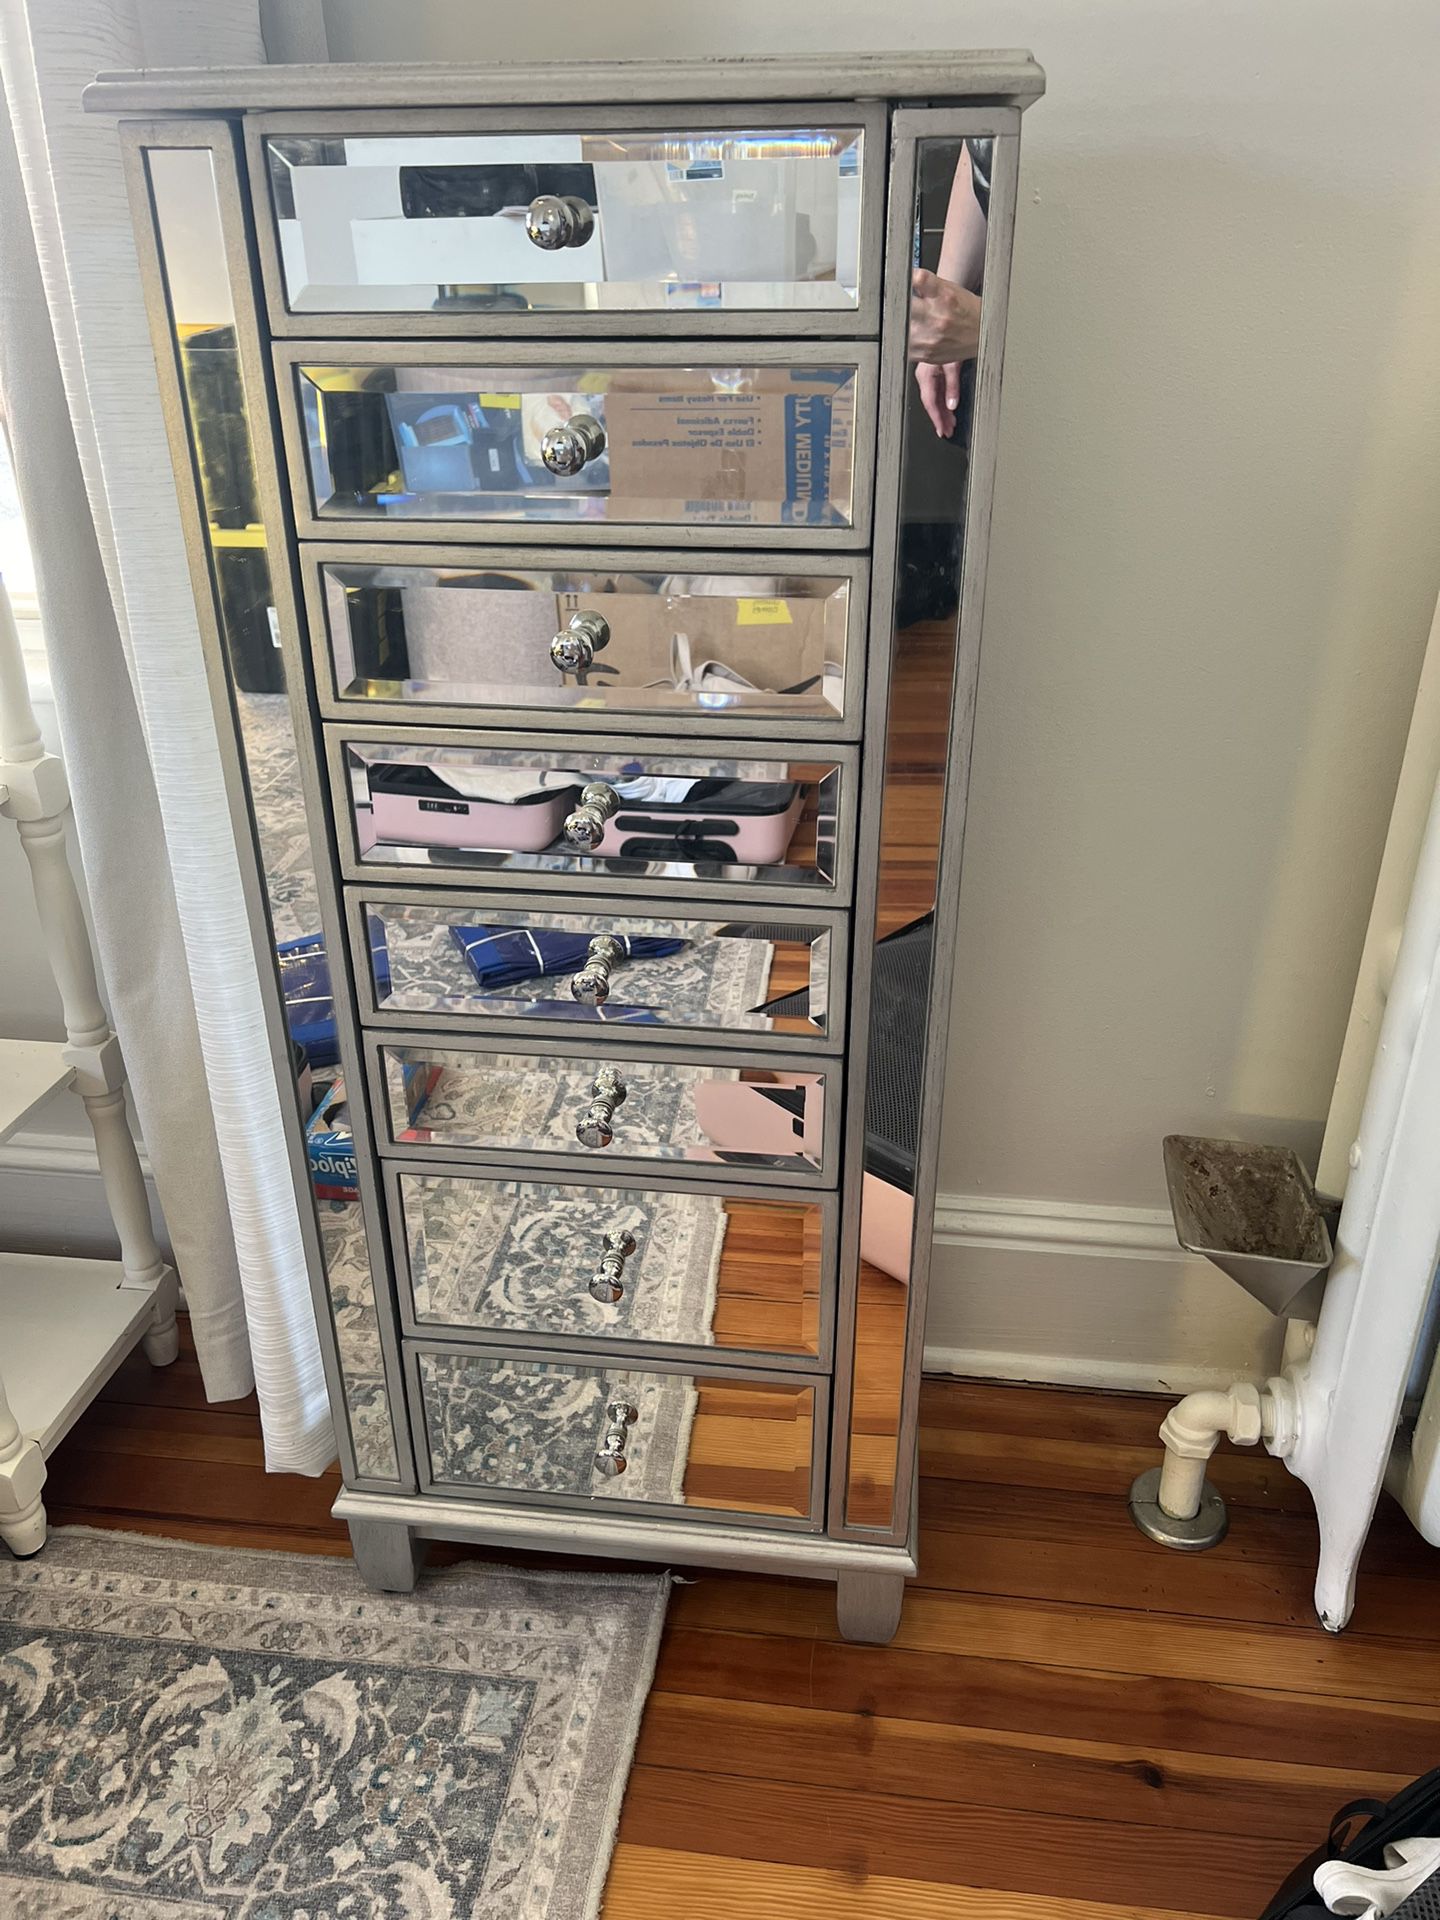 Mirrored Jewelry Armoire